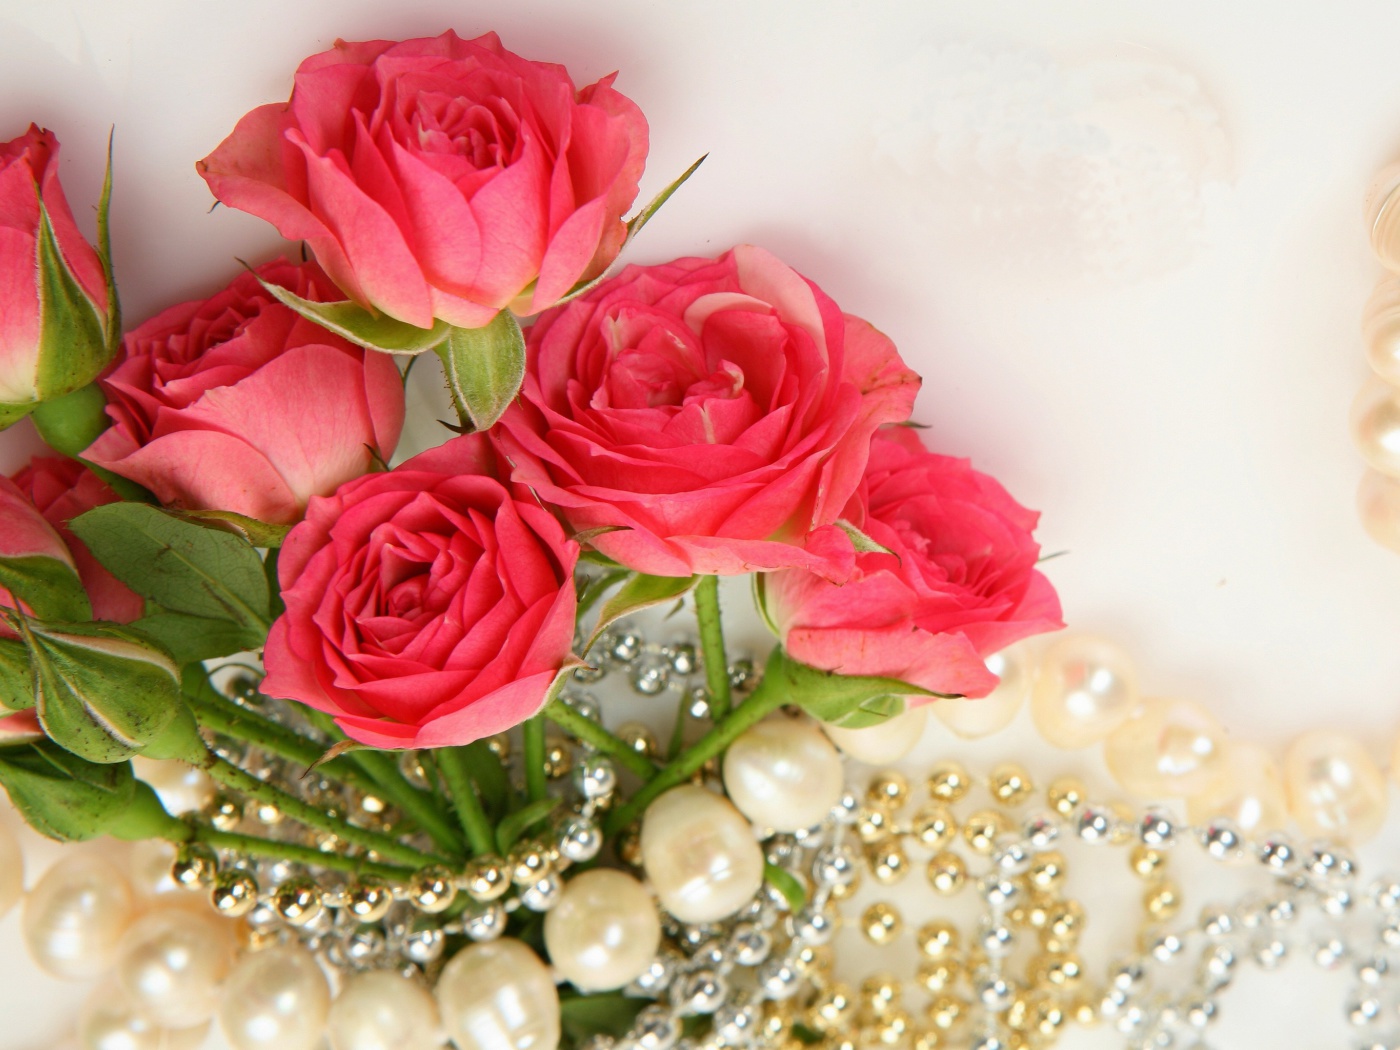 Das Necklace and Roses Bouquet Wallpaper 1400x1050